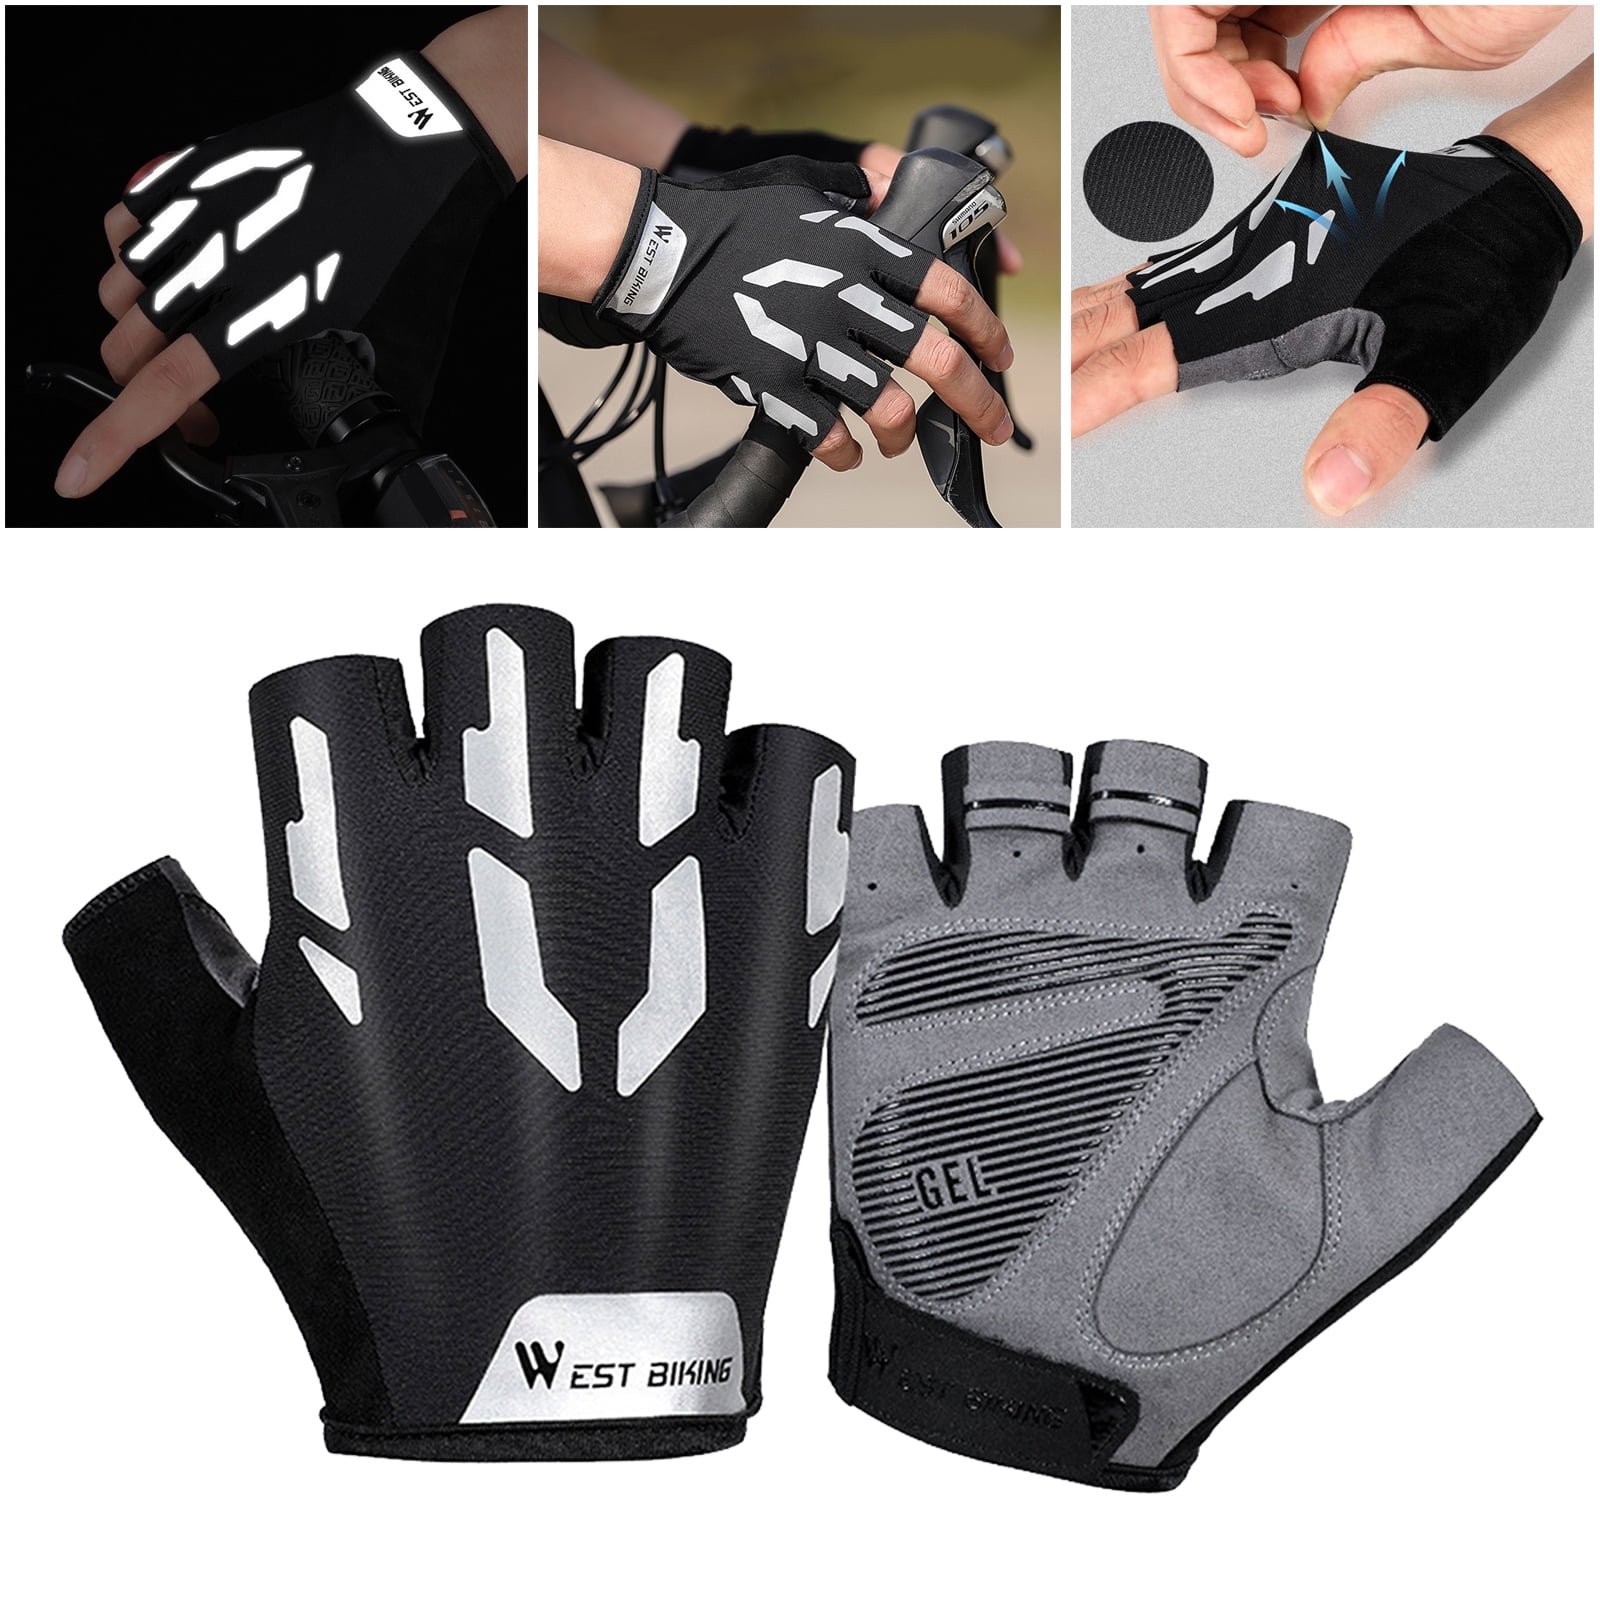 Onex Mesh Breathable Cycling Gloves motorcycle Mountain Bike Working Wheelchair 